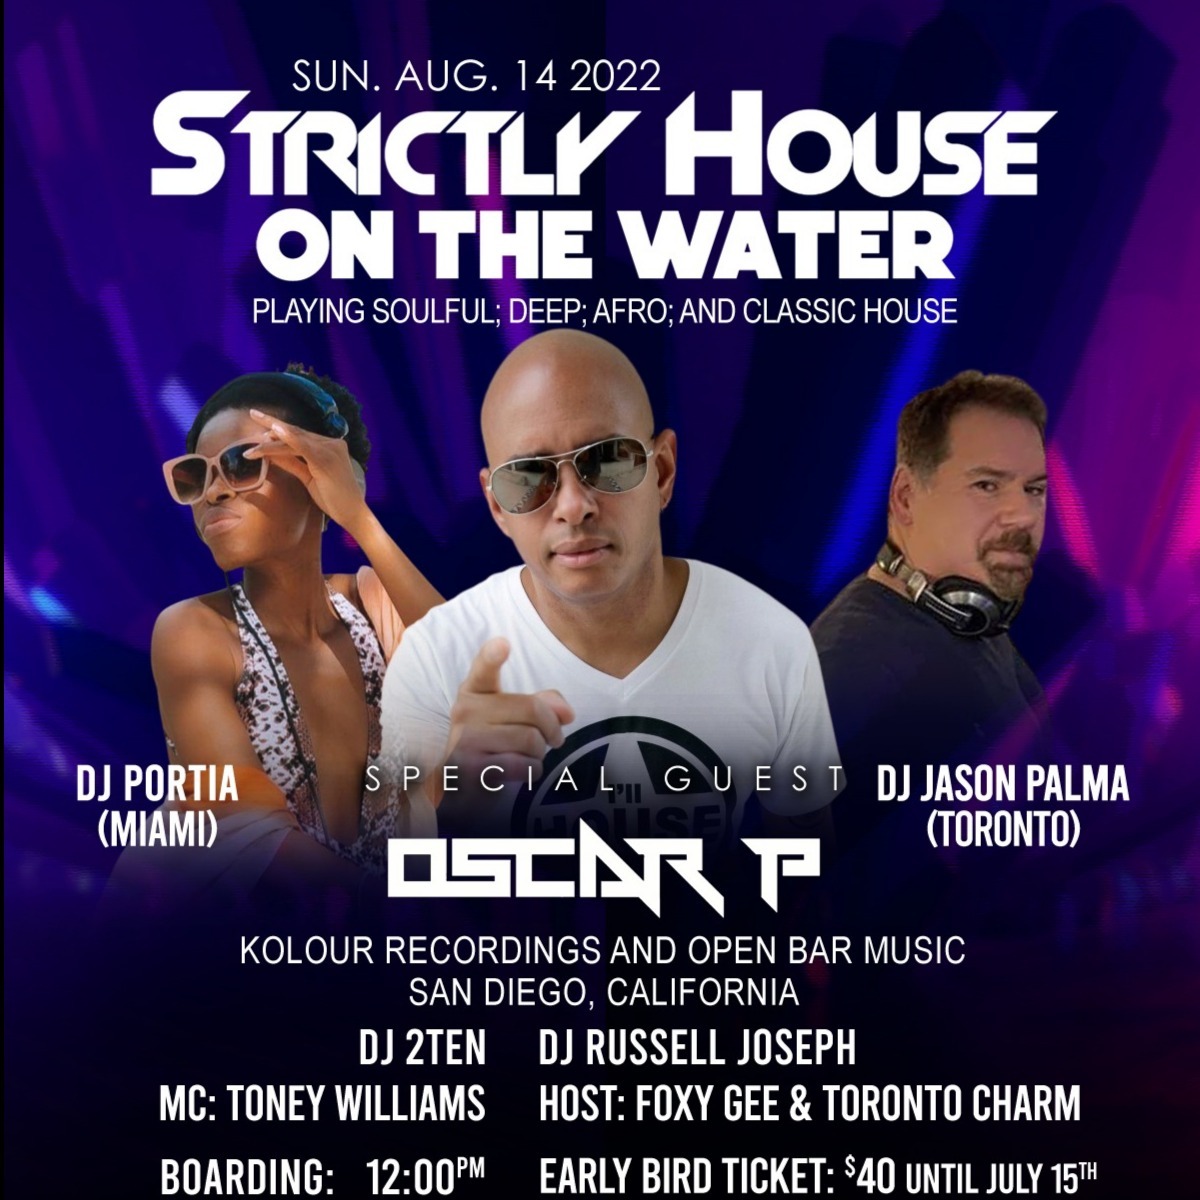 STRICTLY HOUSE ON THE WATER